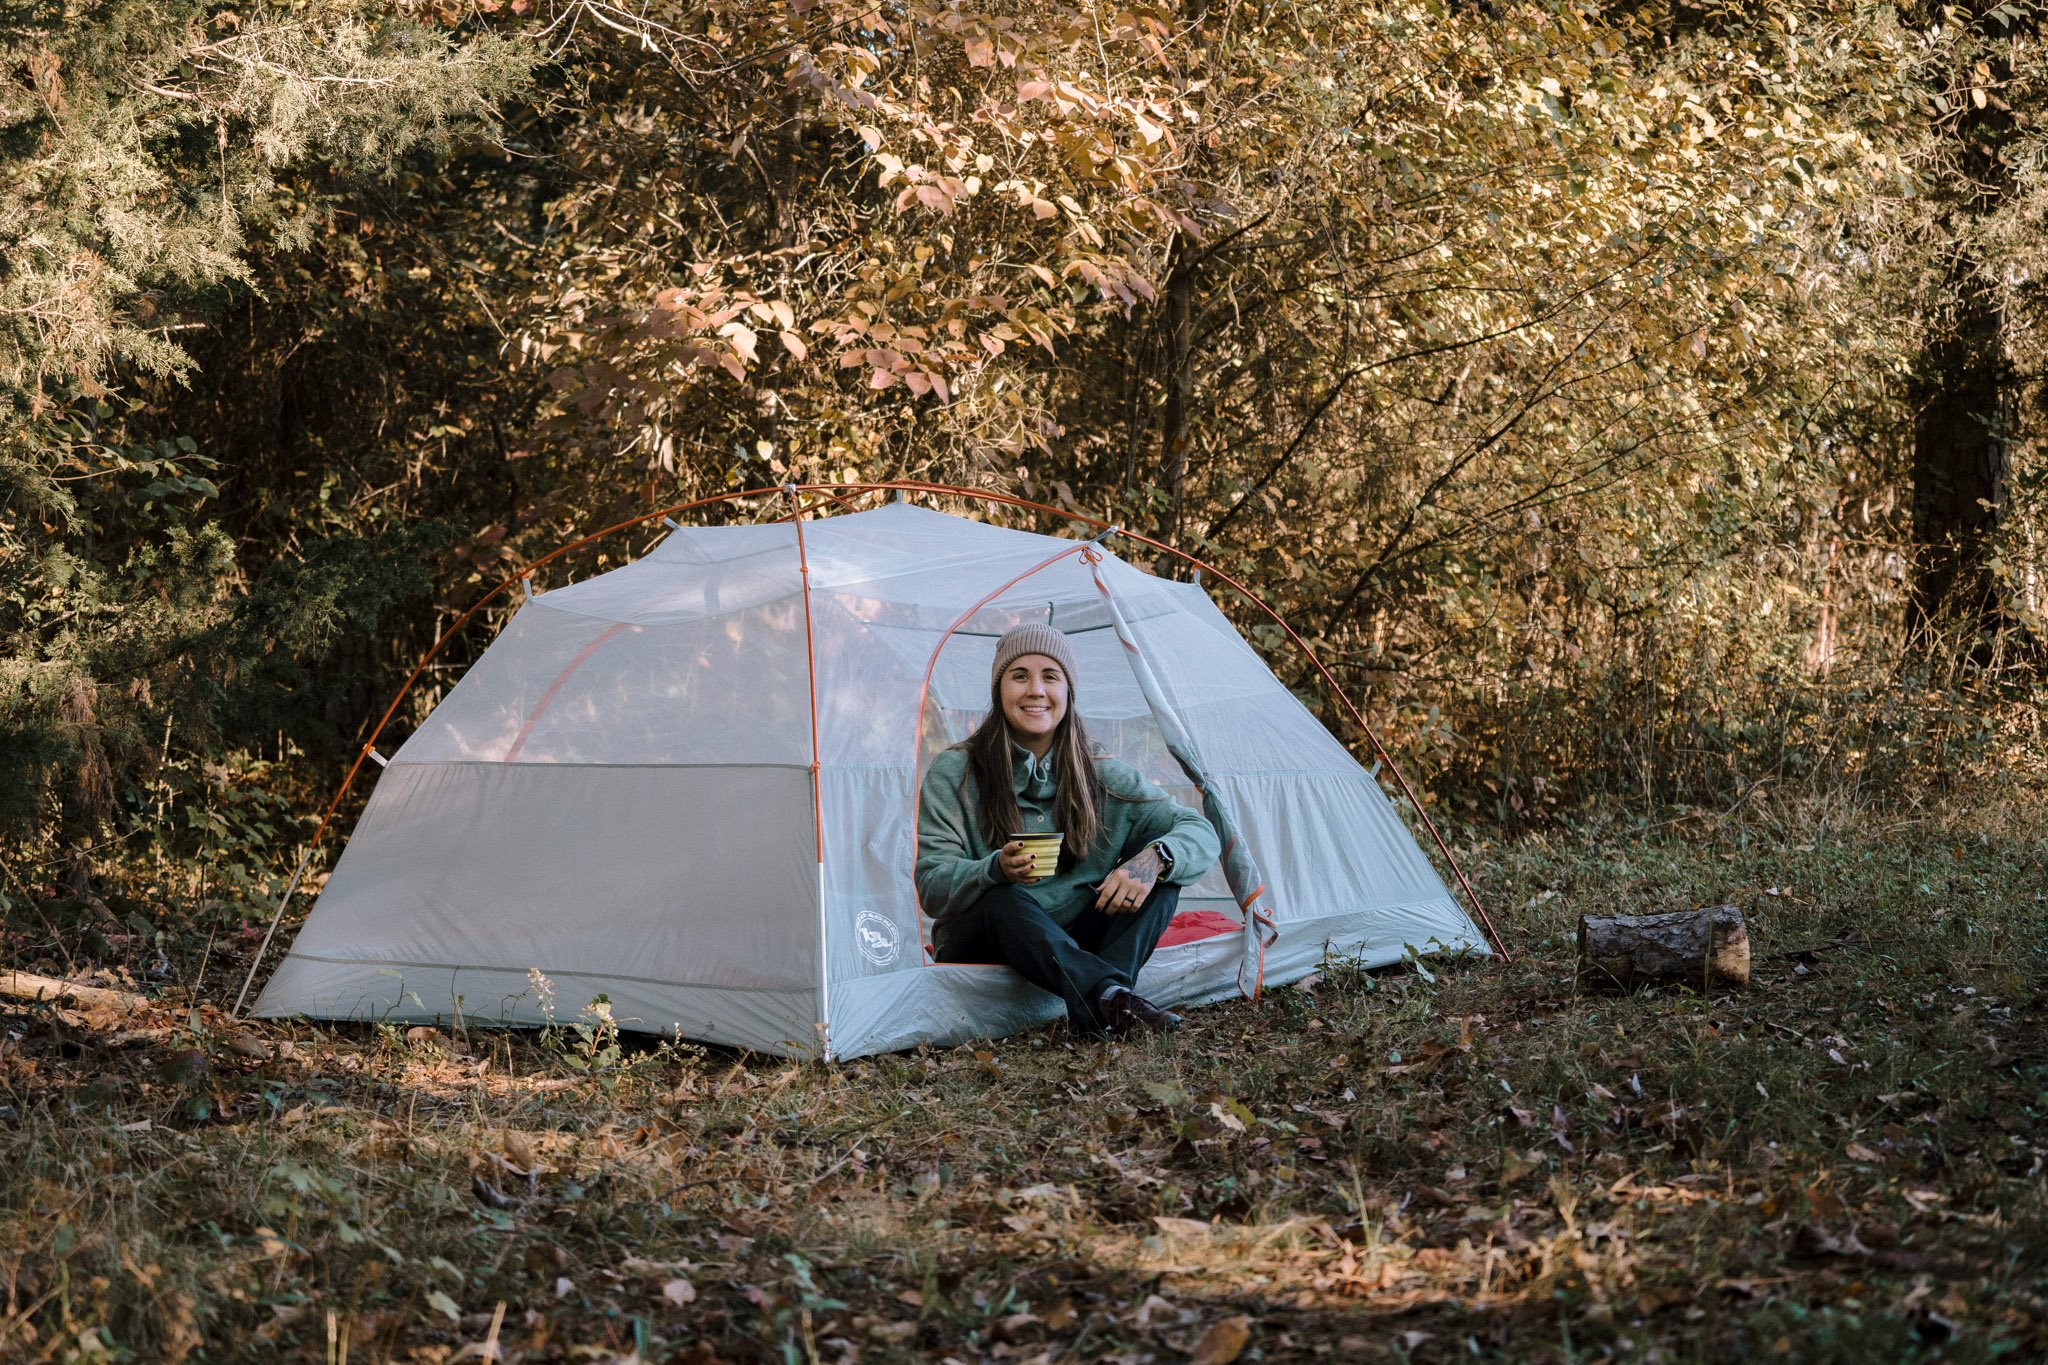 Bethany, the author of this post, sits in a camping tent holding a Sea to Summit collapsible bowl. One of the items in this list of camping gear suggestions!